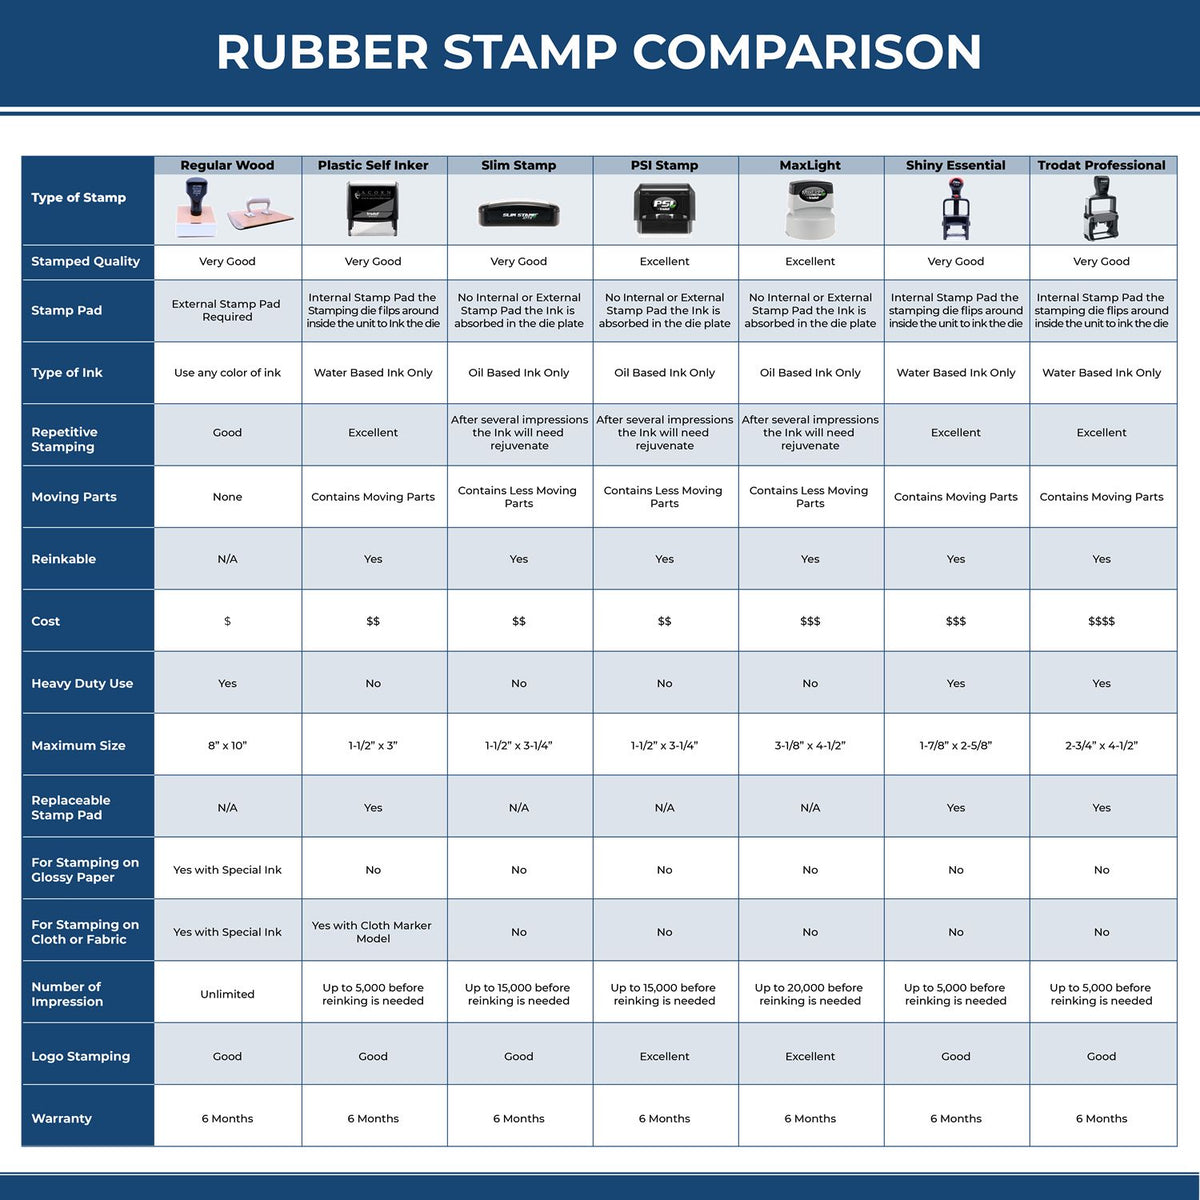 A comparison chart for the different types of mount models available for the Self-Inking Arkansas PE Stamp.